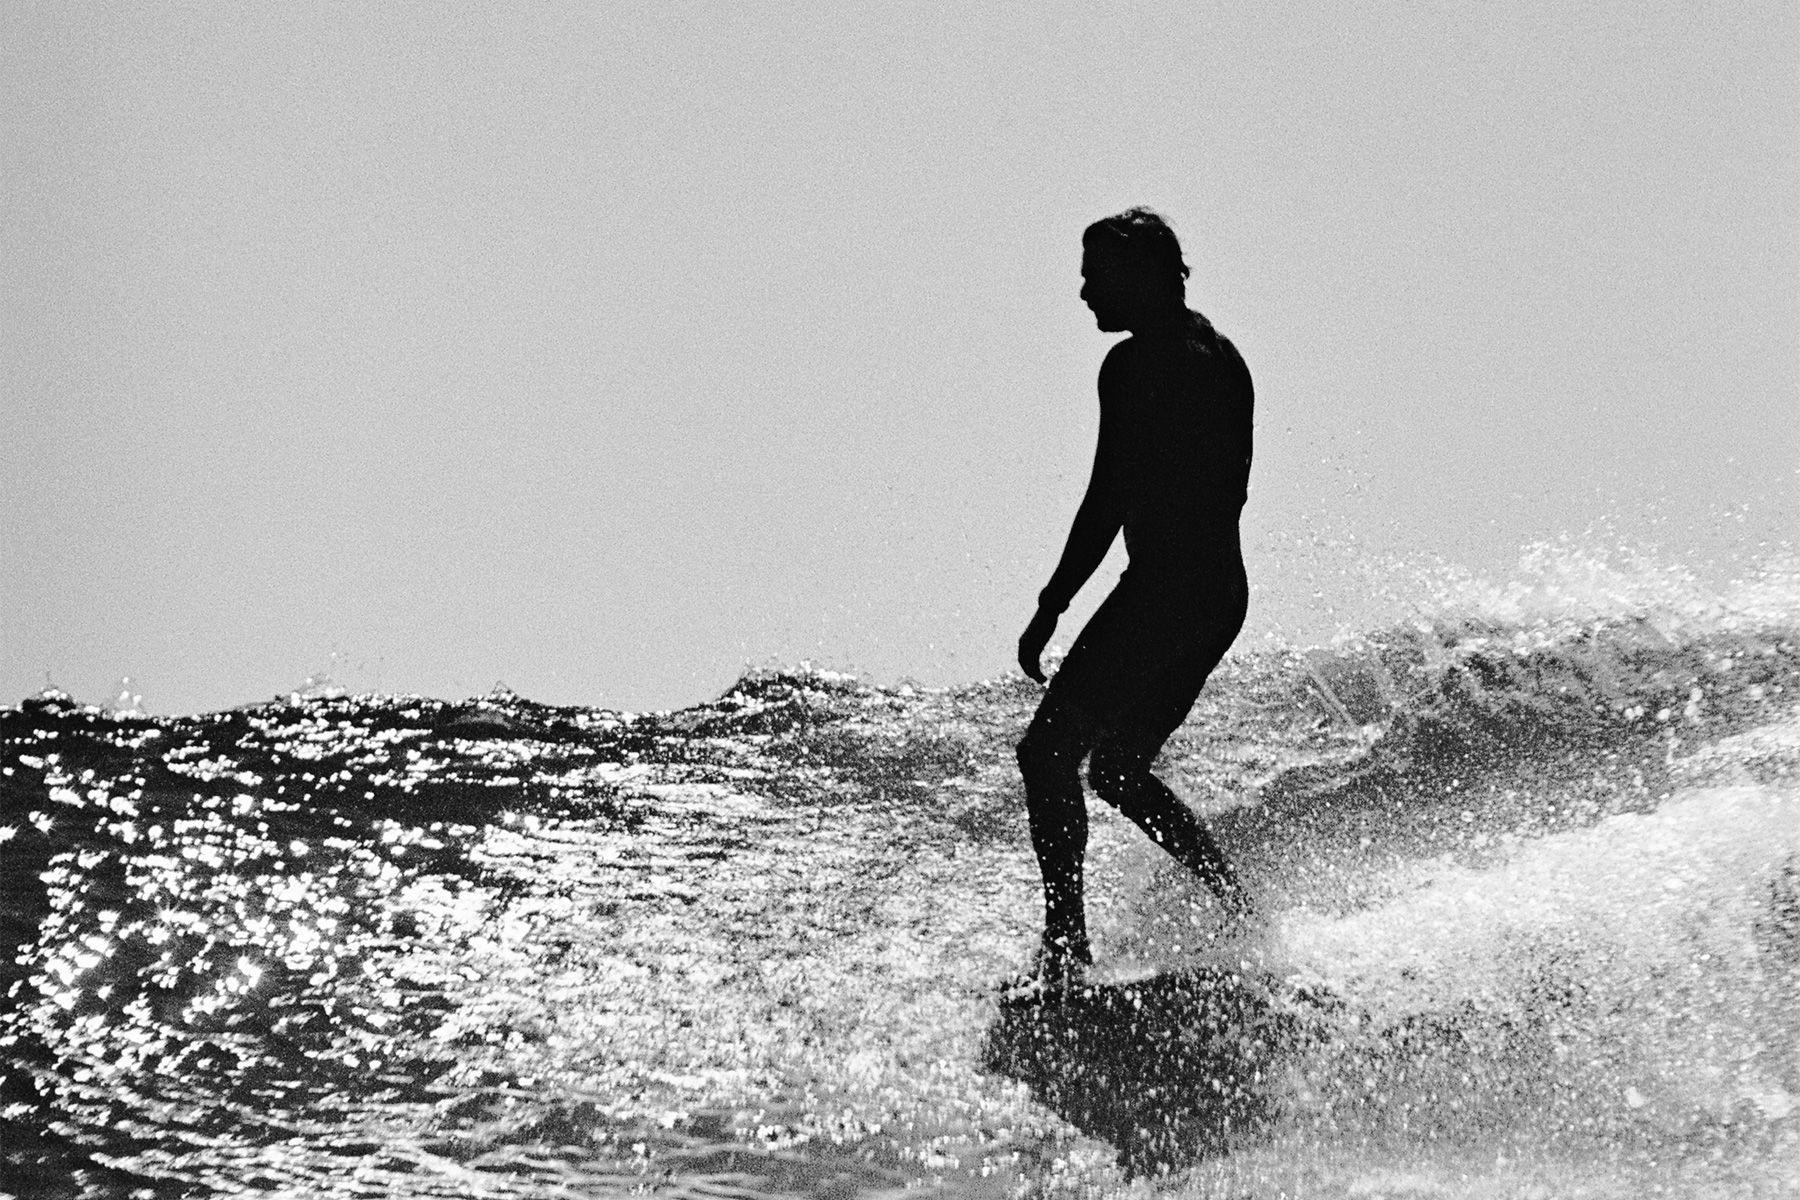 surfer noseriding at malibu, photographed on 35mm film using a nikonos camera by grant musso